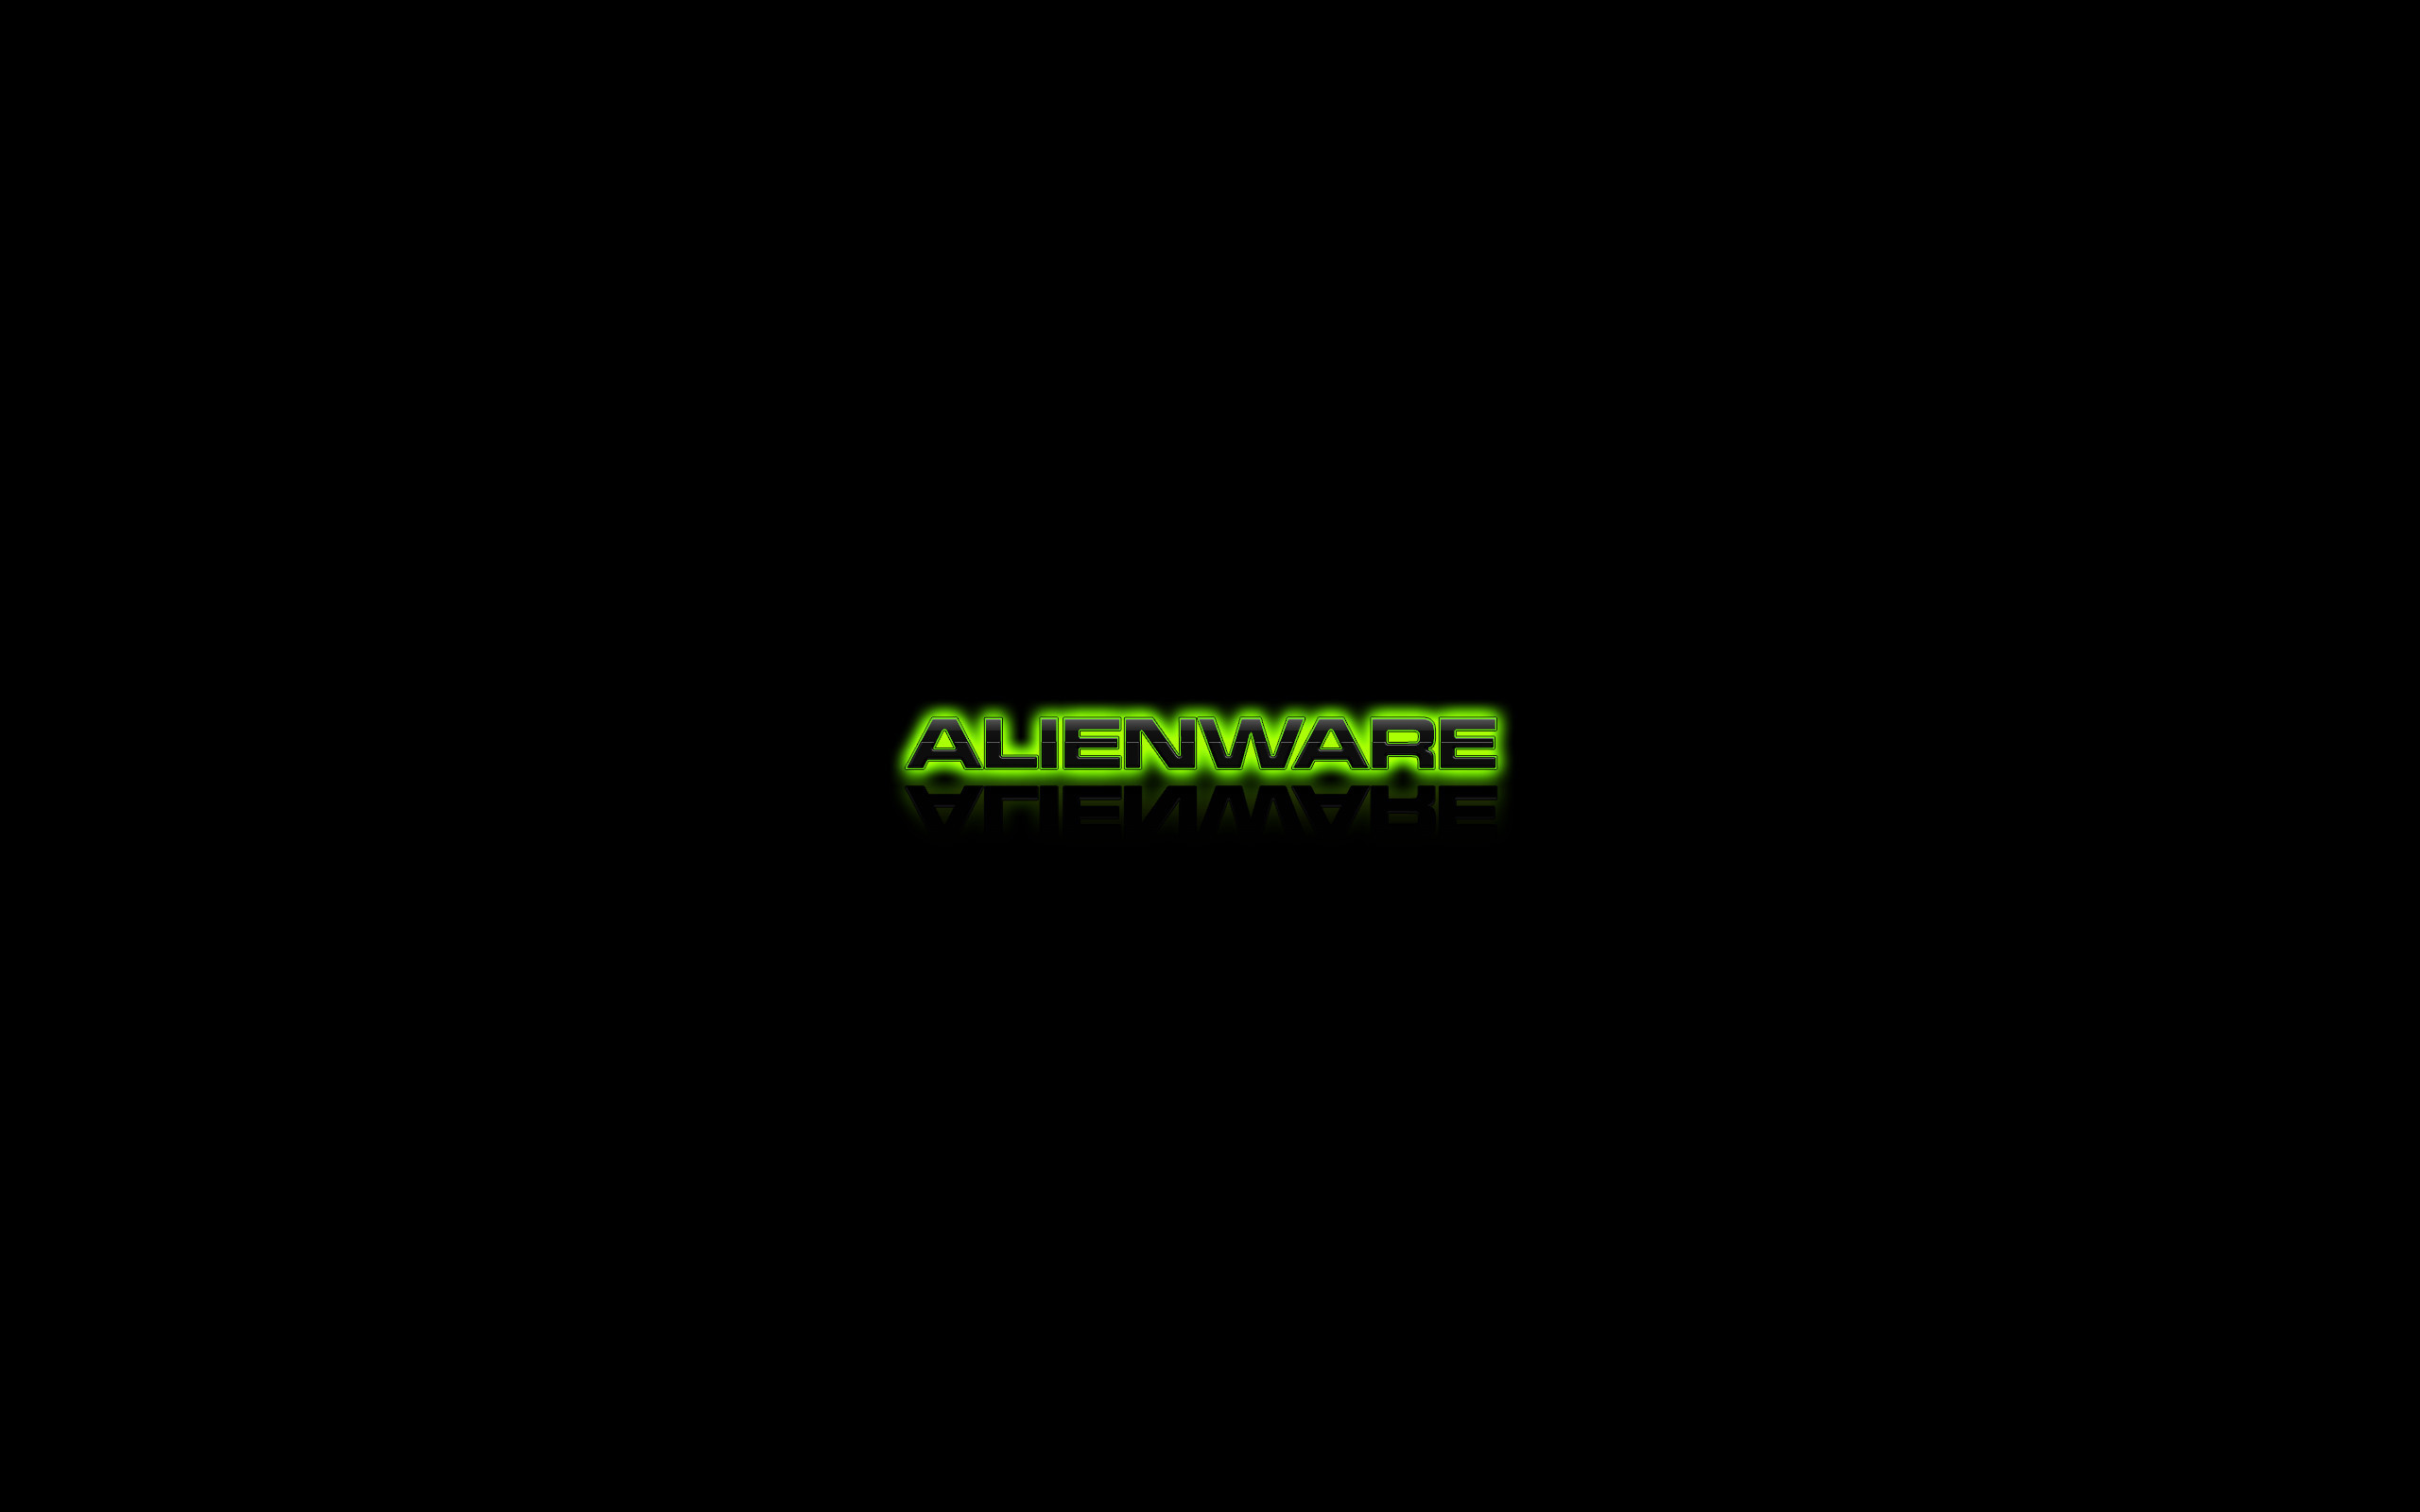 2560x1600 1920x1200 Alienware 1366x768 Images High Quality px